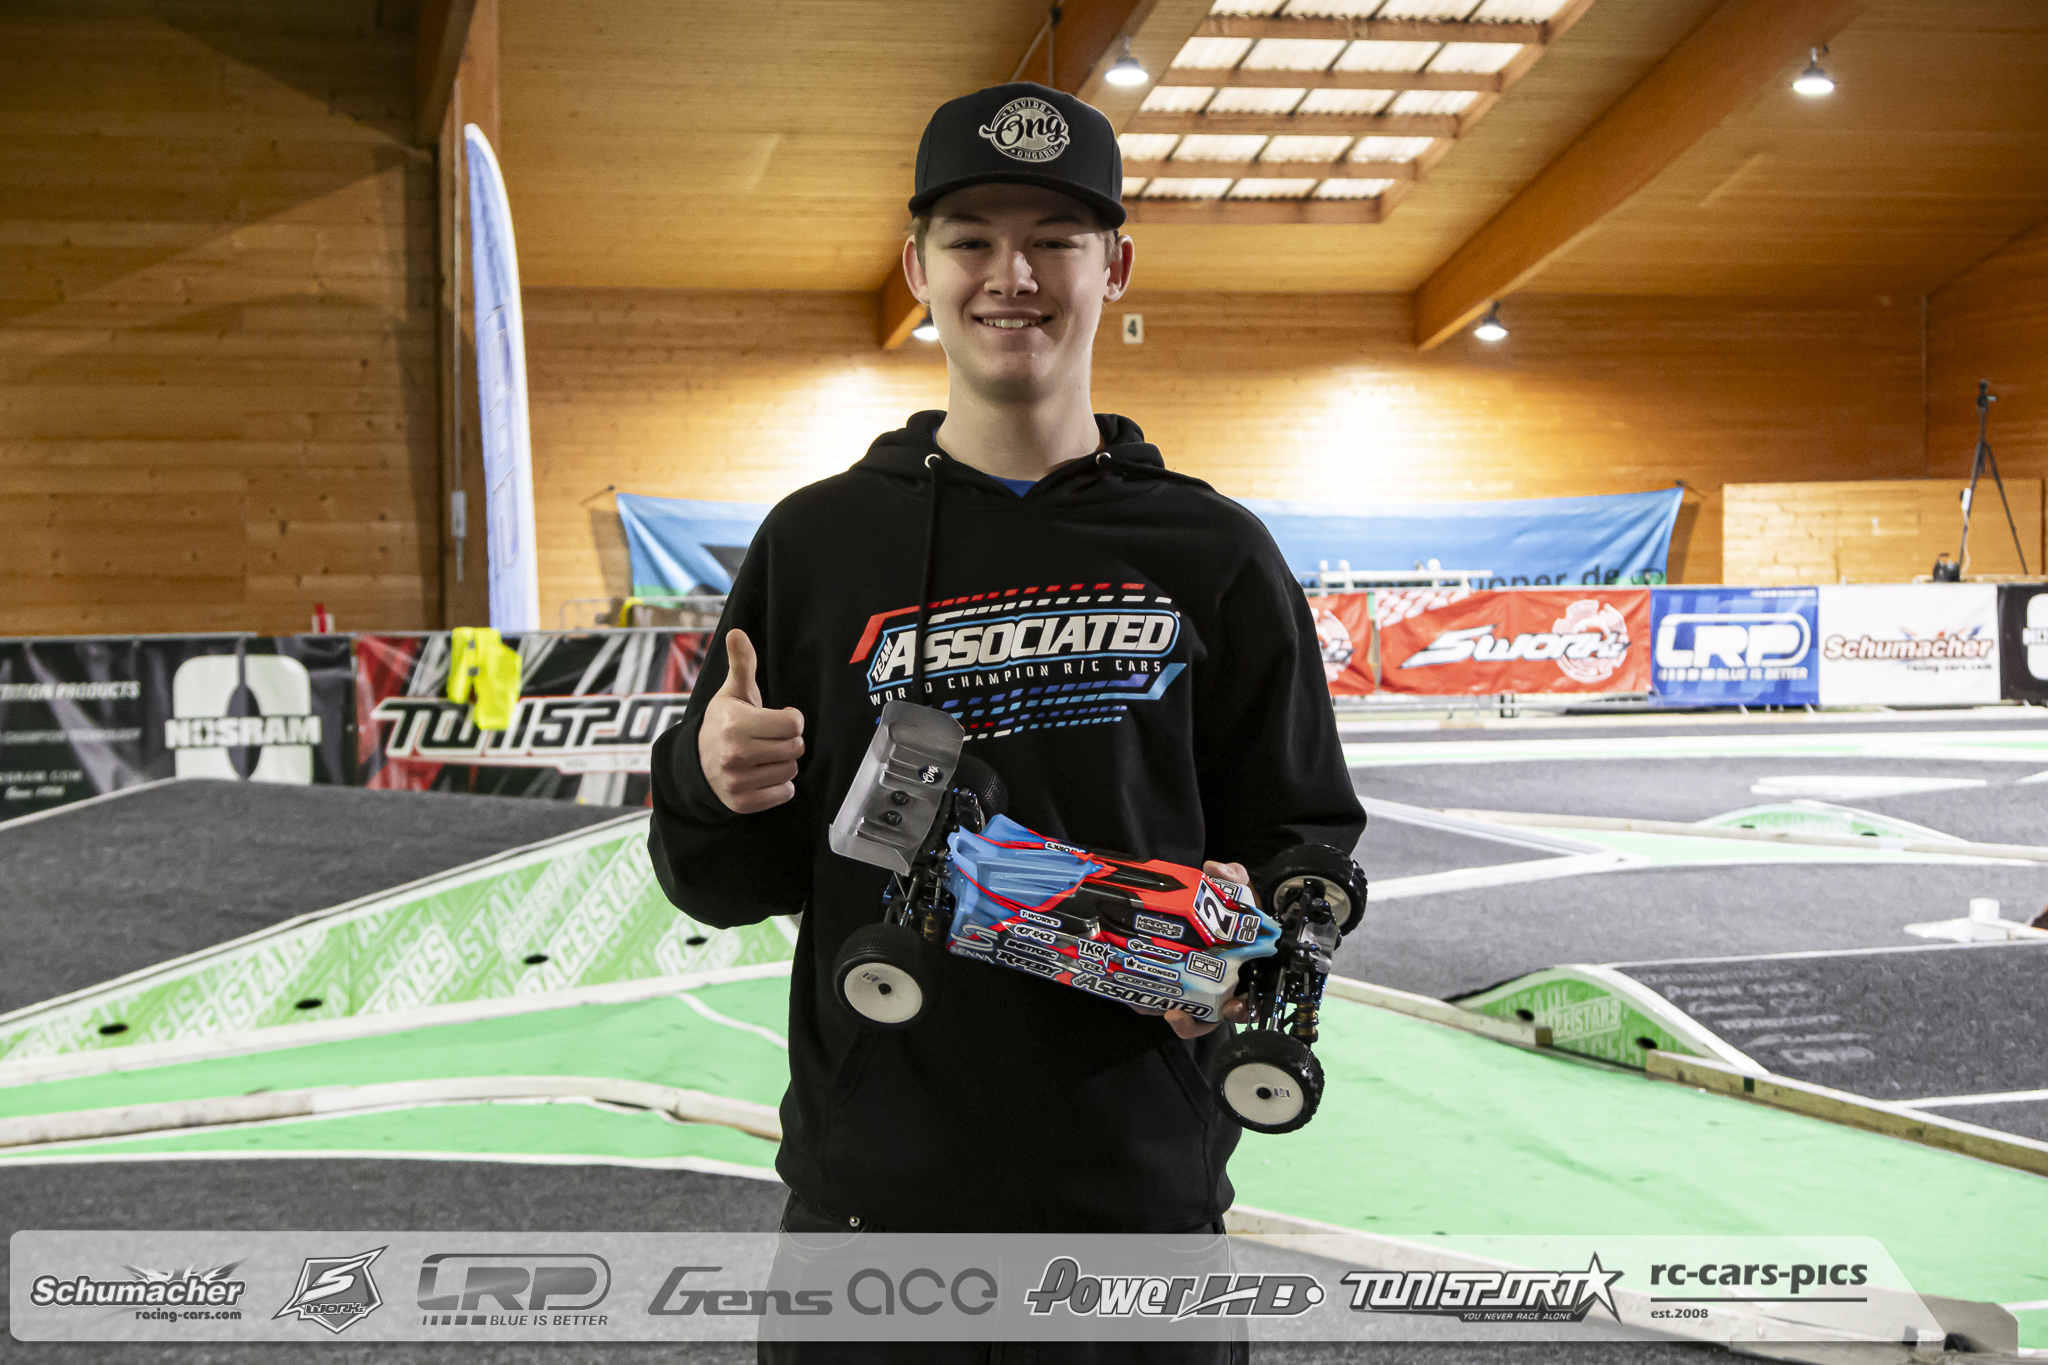 Team Assoociated`s Kaerup is 4WD TQ at the EOS in Germany